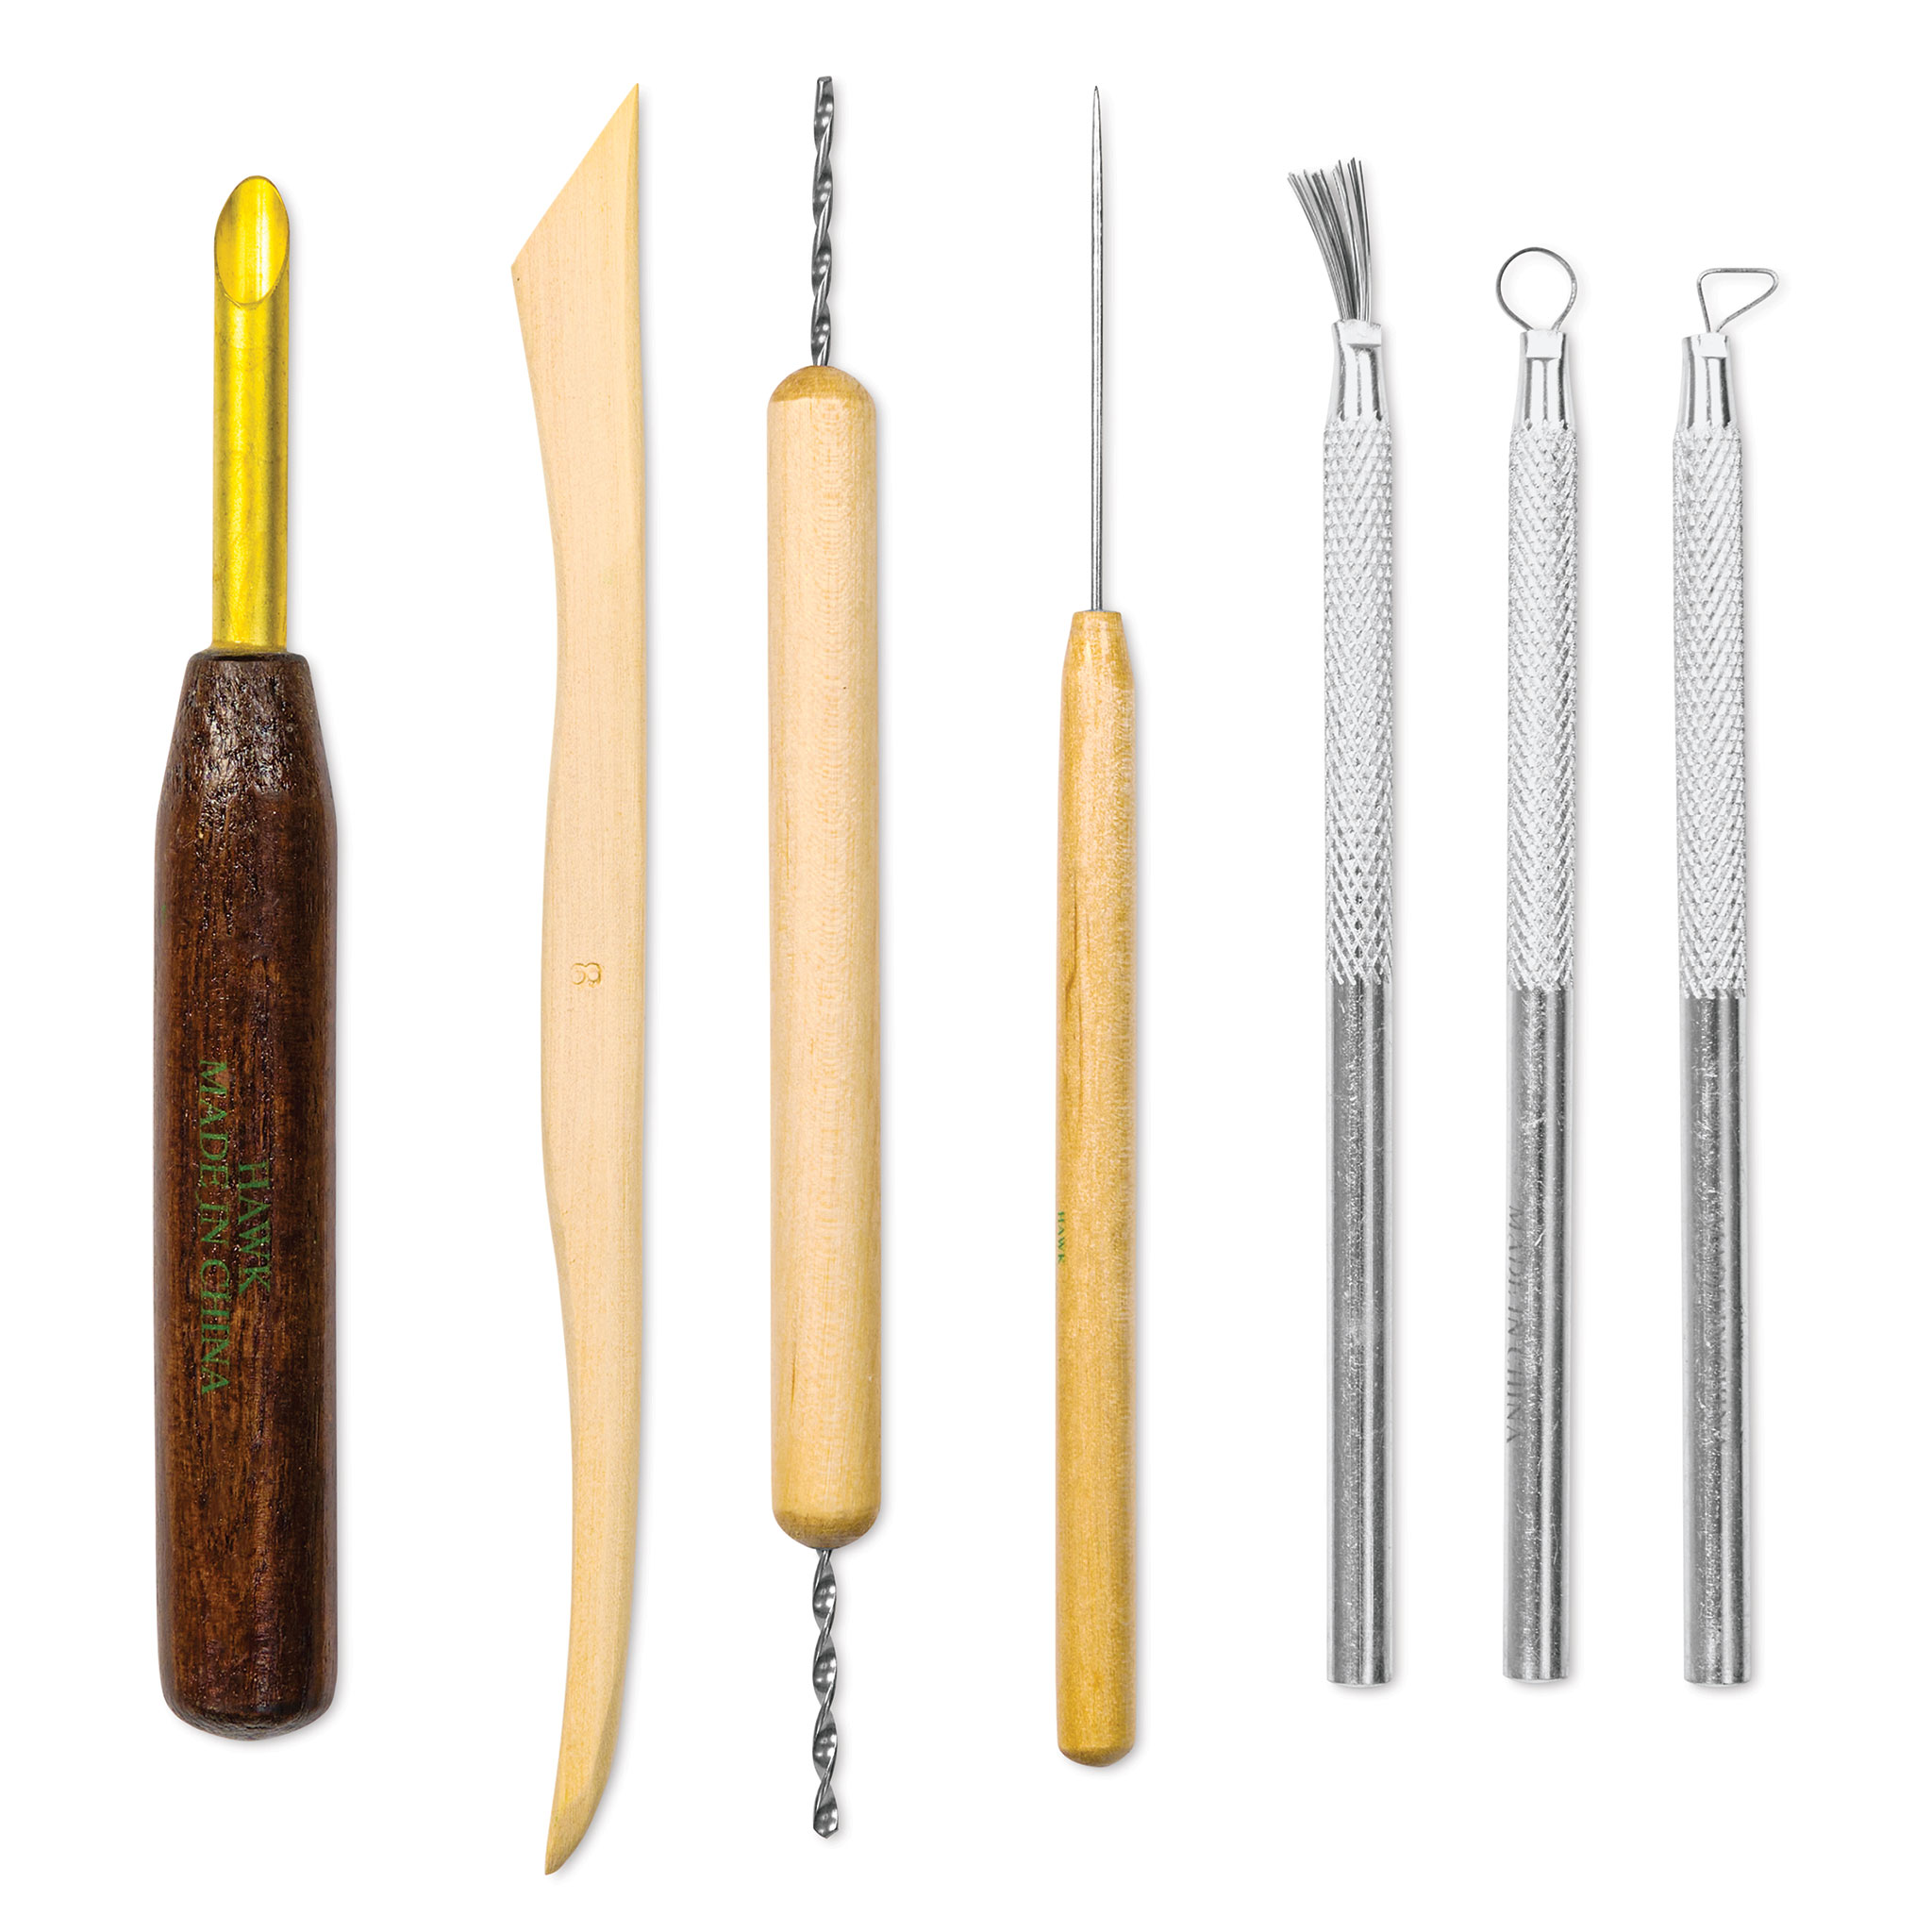 17 Piece Pottery Polymer Clay Sculpting Tools Kits with Wooden